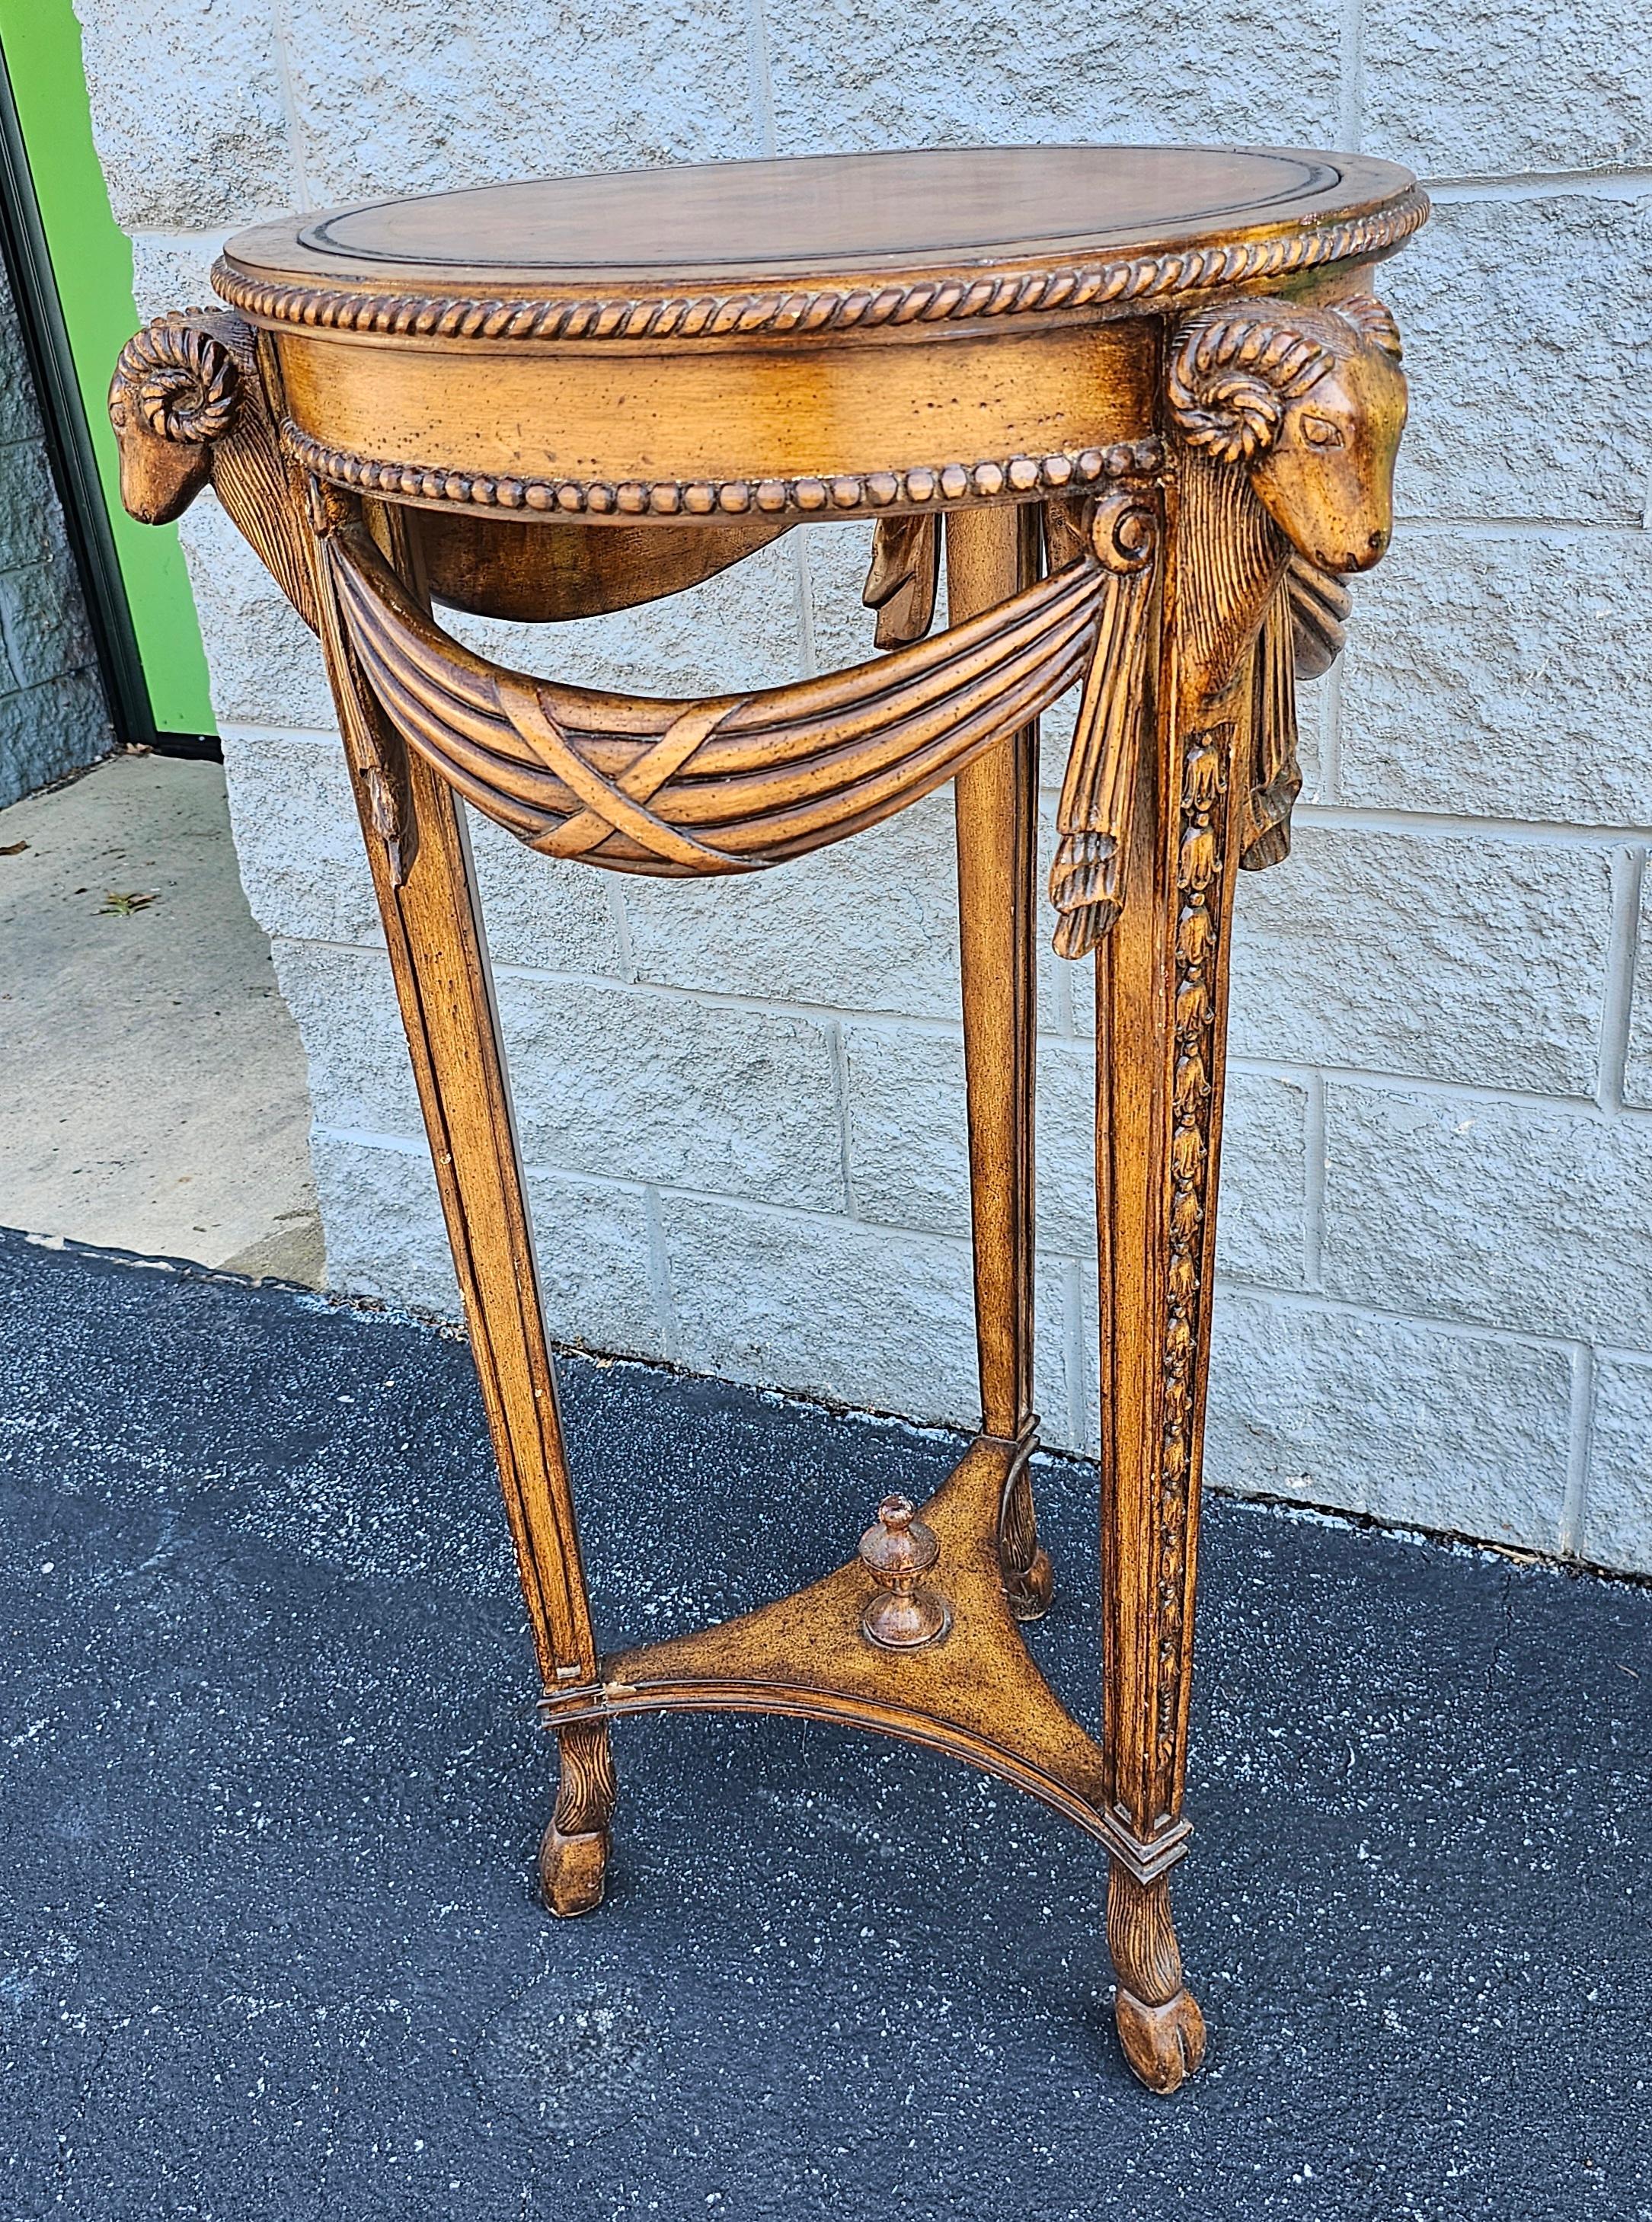 20th Century 20th C. Neoclassical Style Fruitwood Rams Head Leather Top Pedestal Side Table For Sale